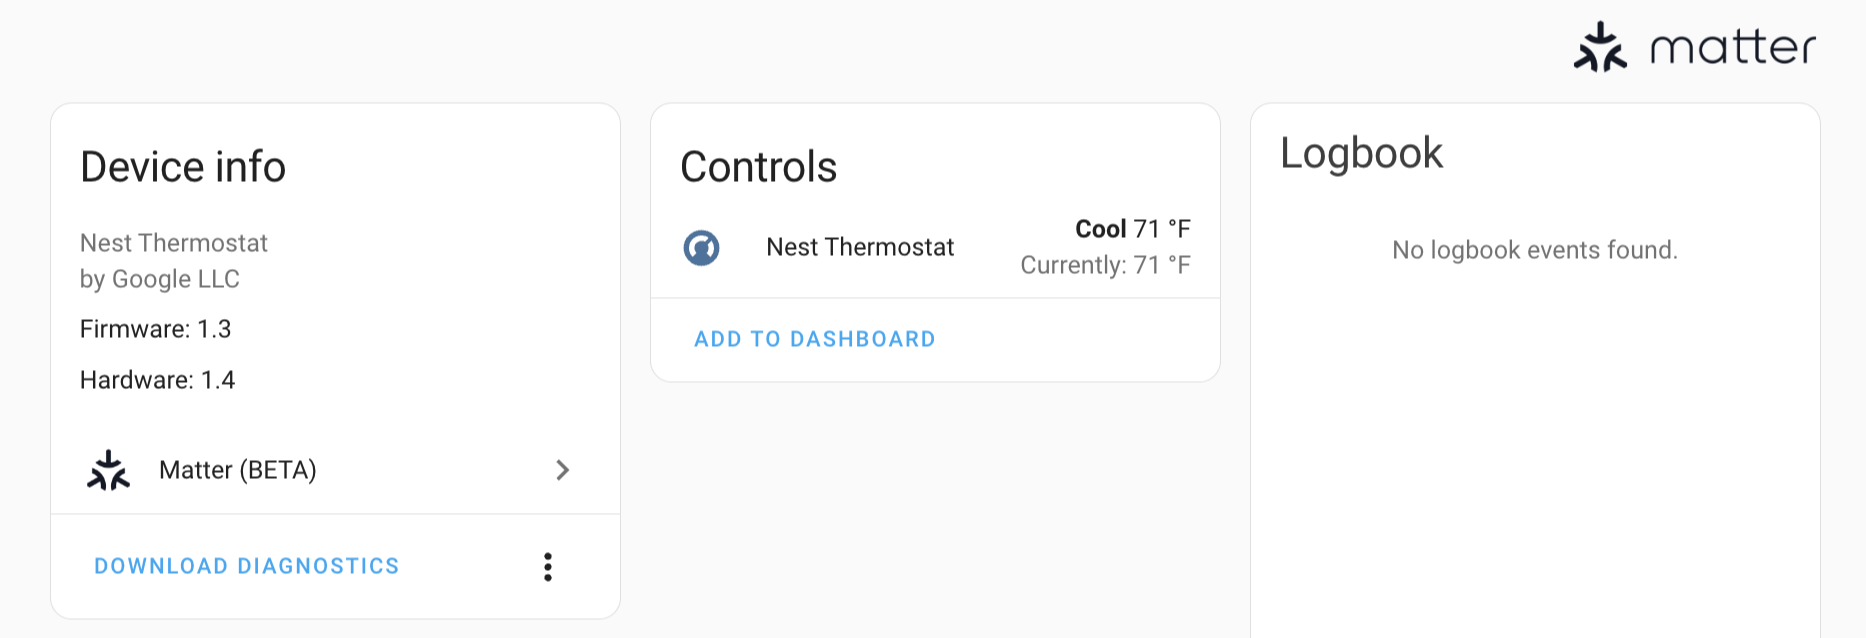 Screenshot of the device info page of a Nest thermostat controlled via Matter in Home Assistant.